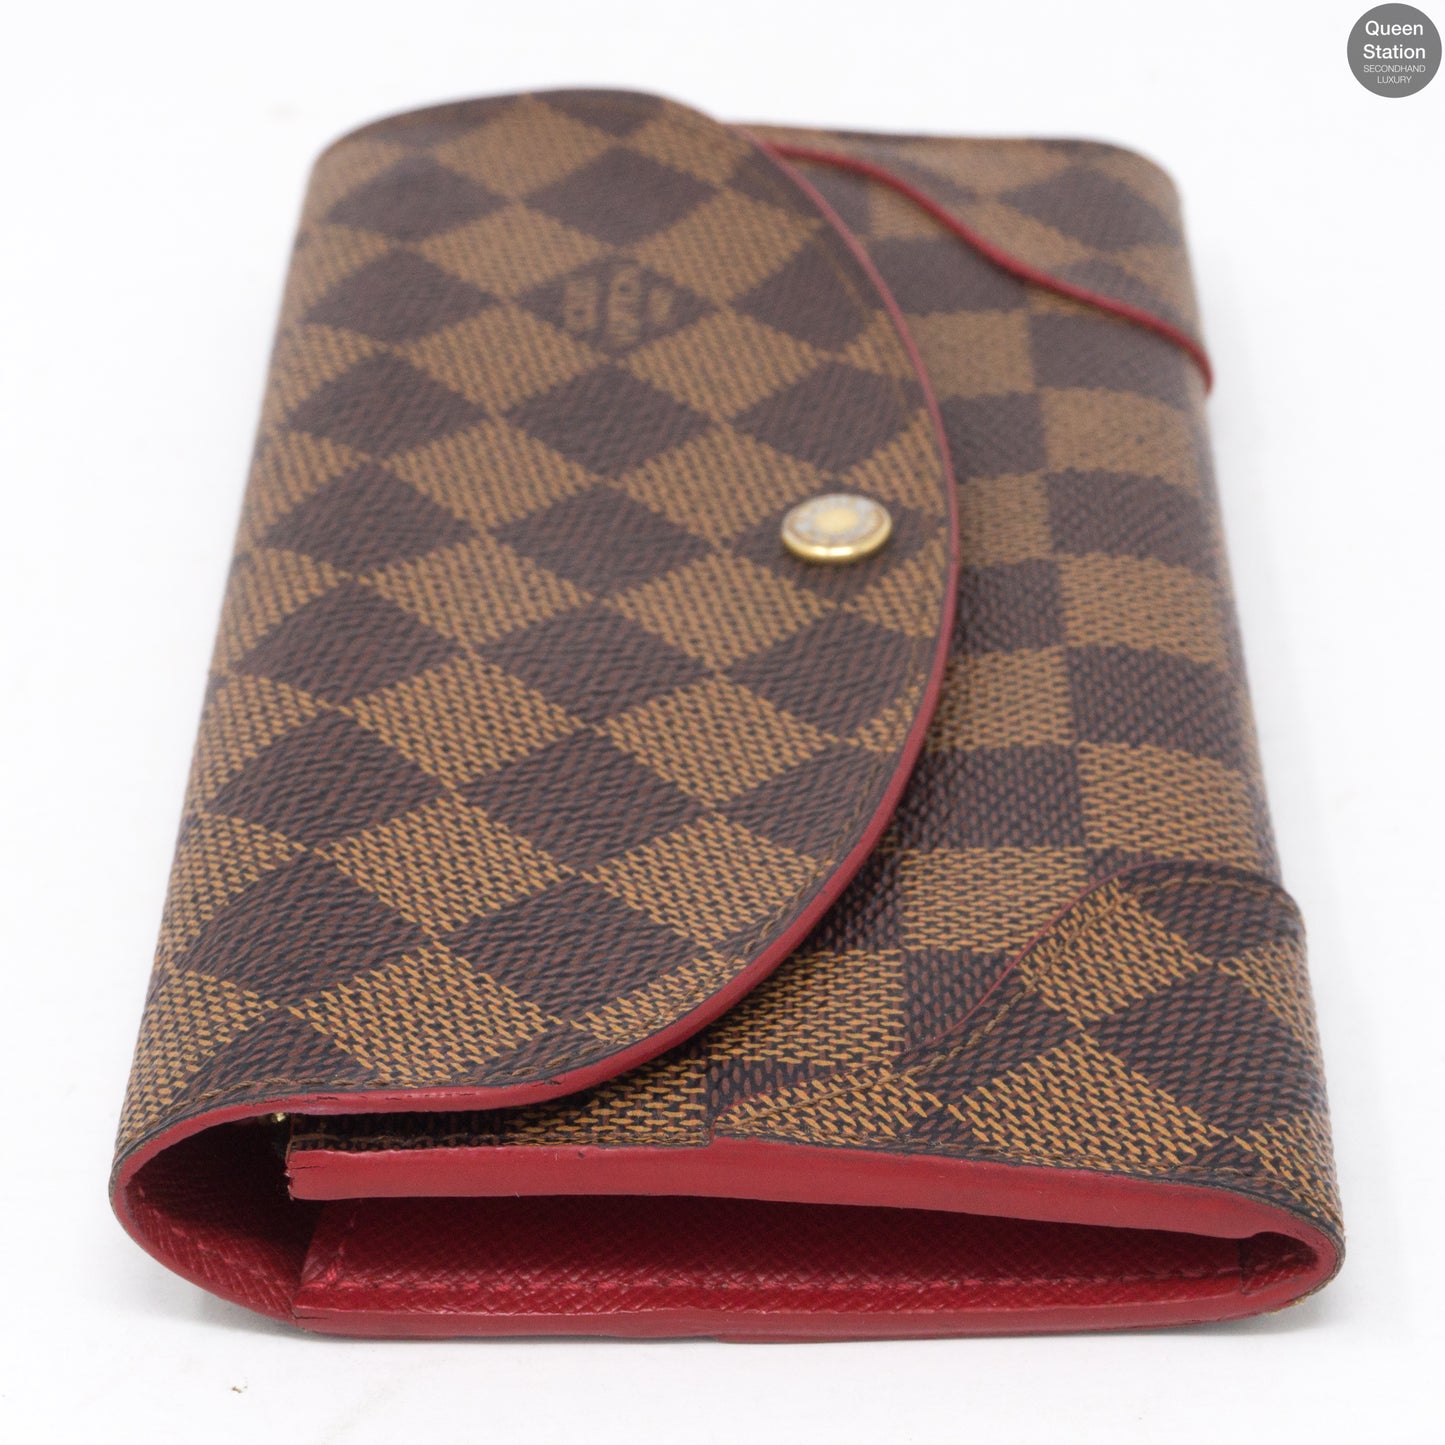 Louis Vuitton Caissa Card Holder Review & In store experience